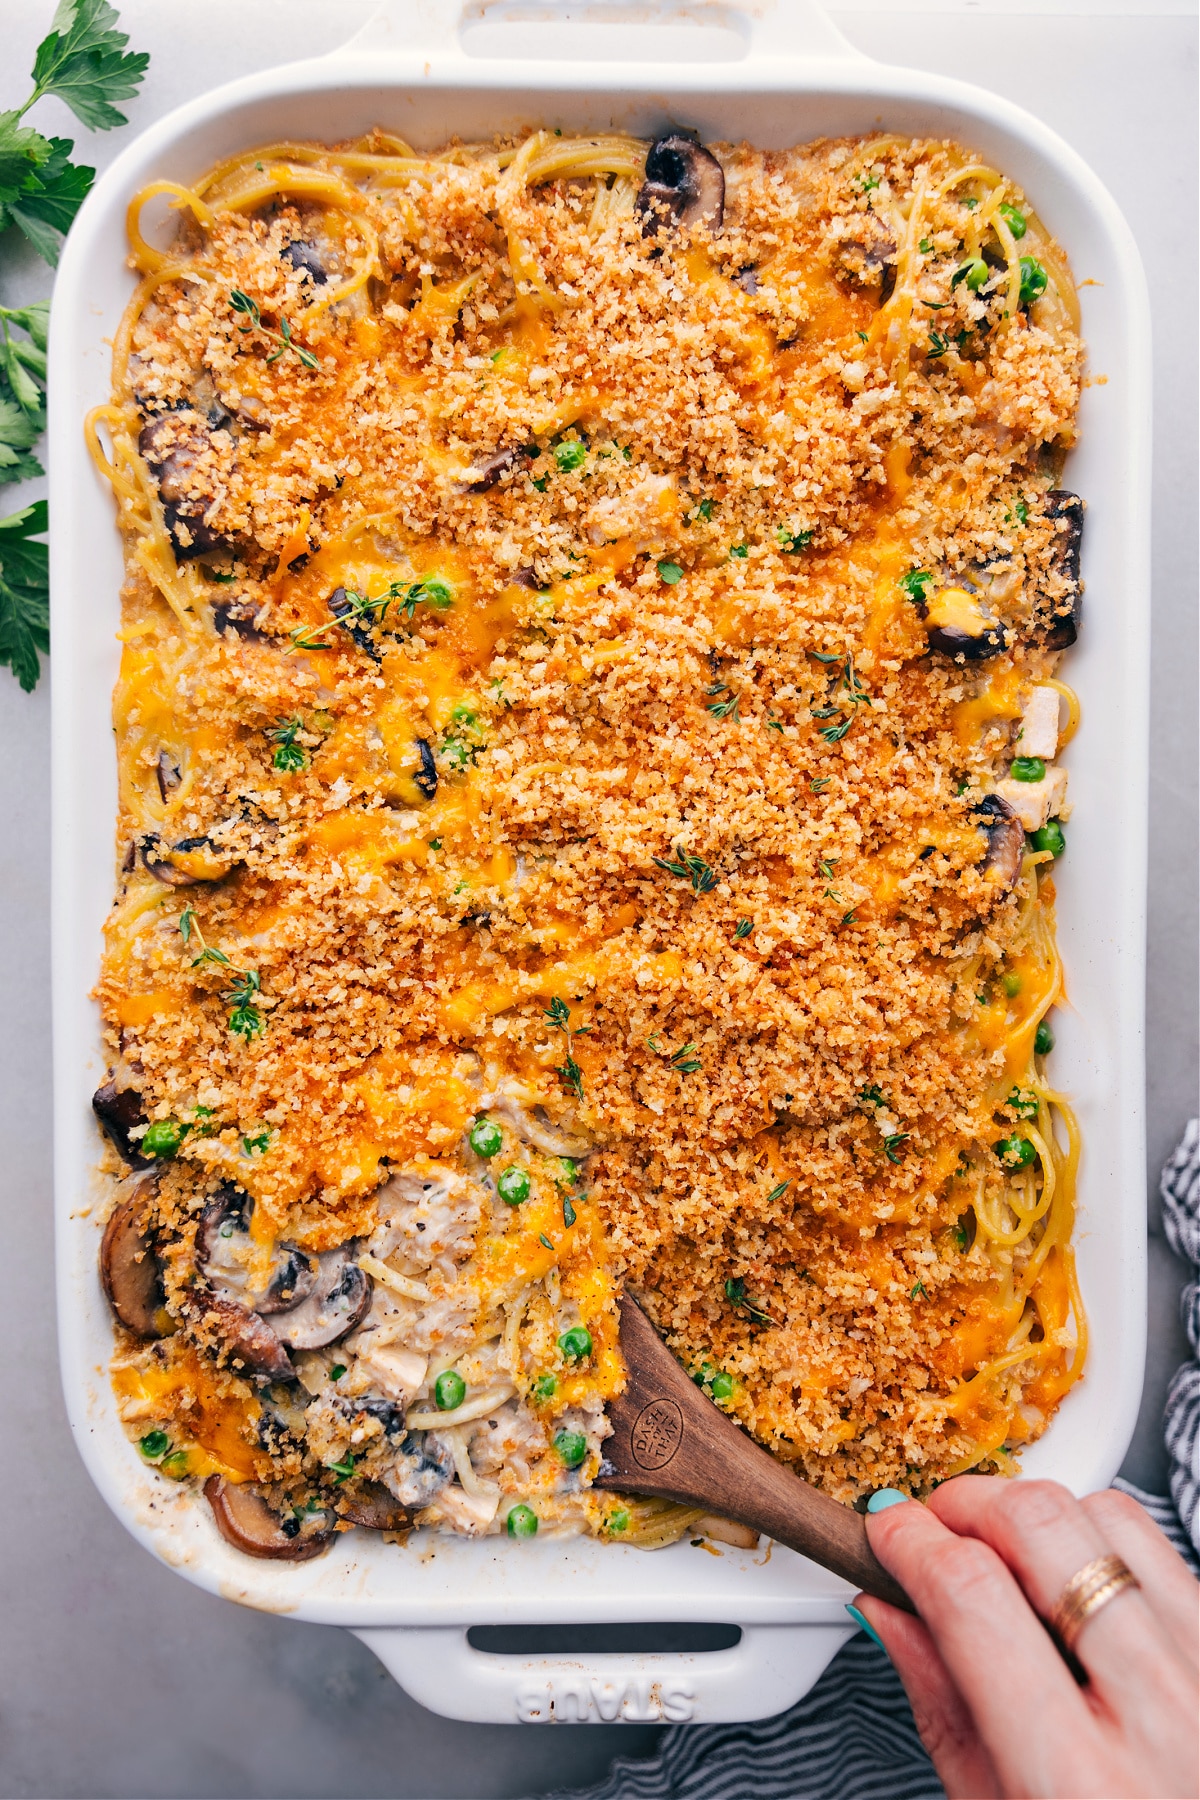 A finished dish of delicious Turkey Tetrazzini, showcasing the crisp top and the mouthwatering interior.